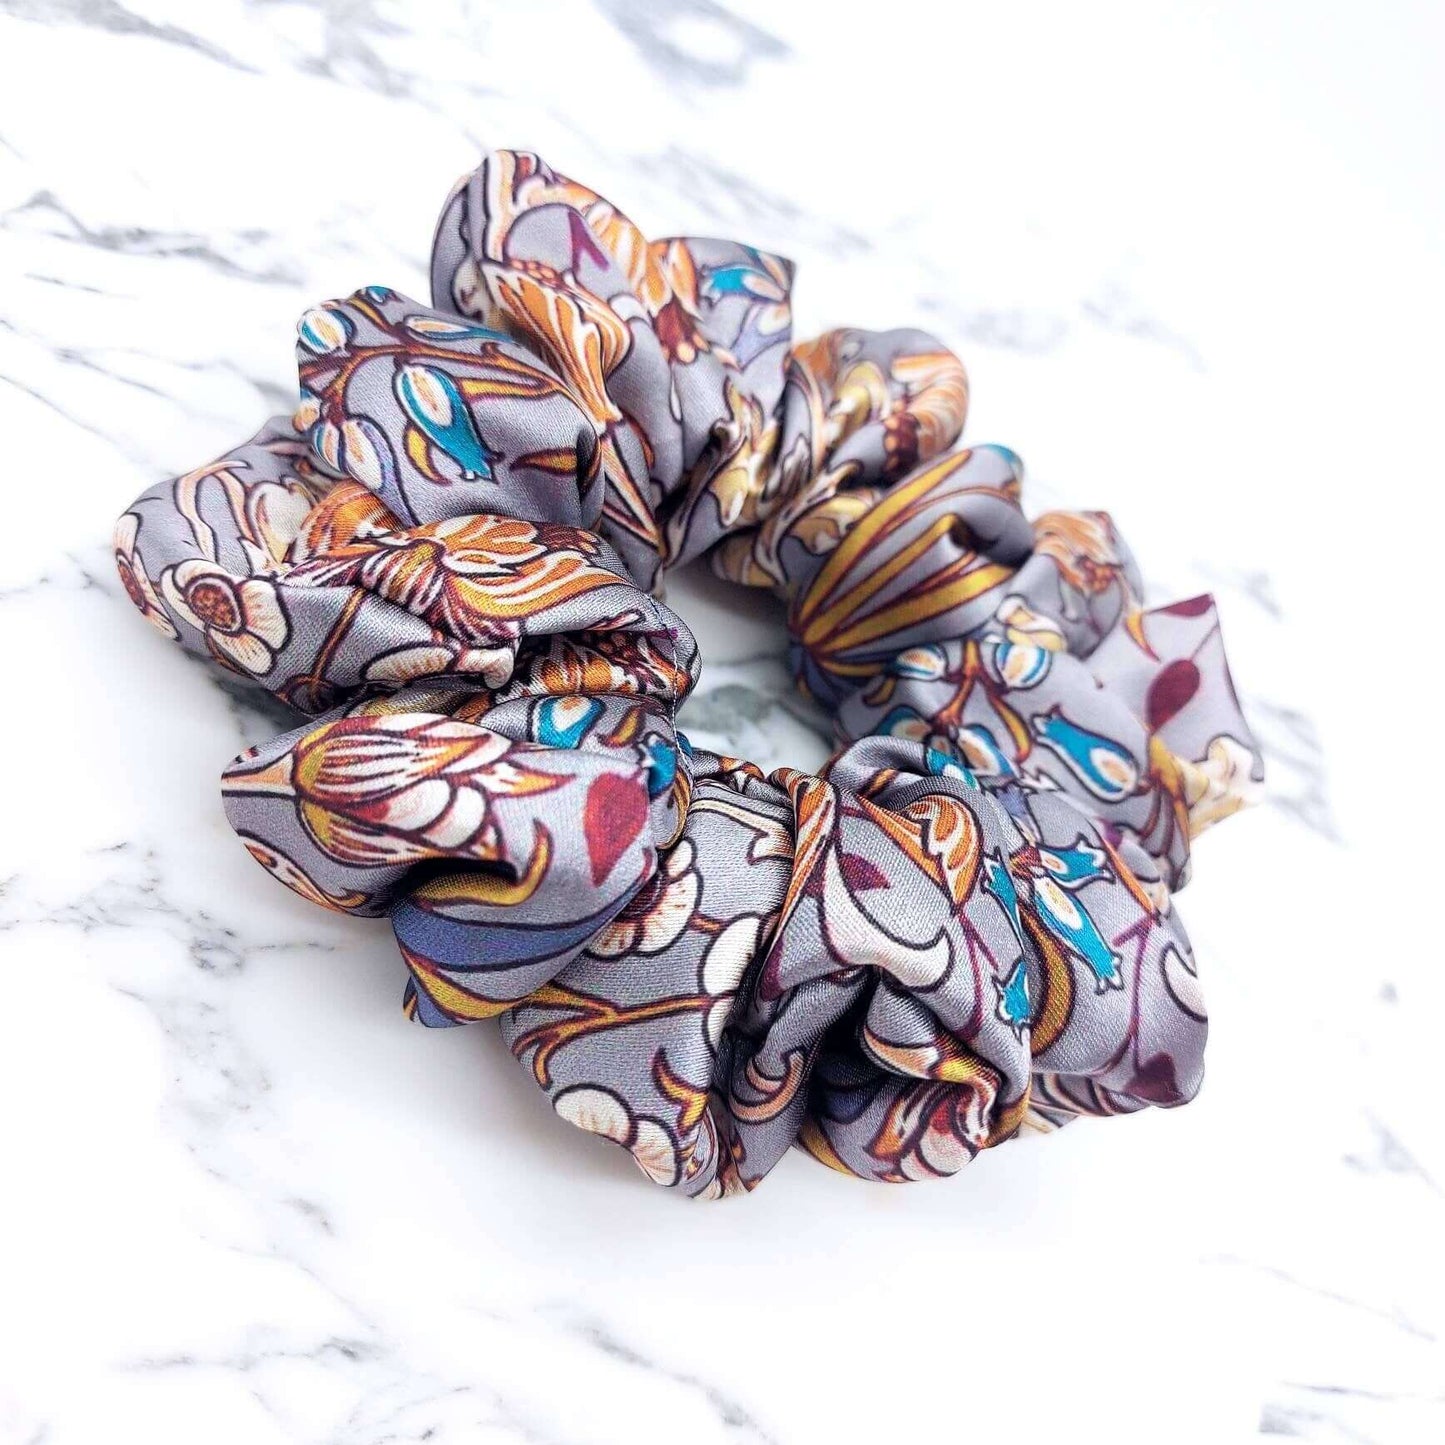 A beautiful grey, William Morris-inspired, patterned satin scrunchie with lots of ruffles.